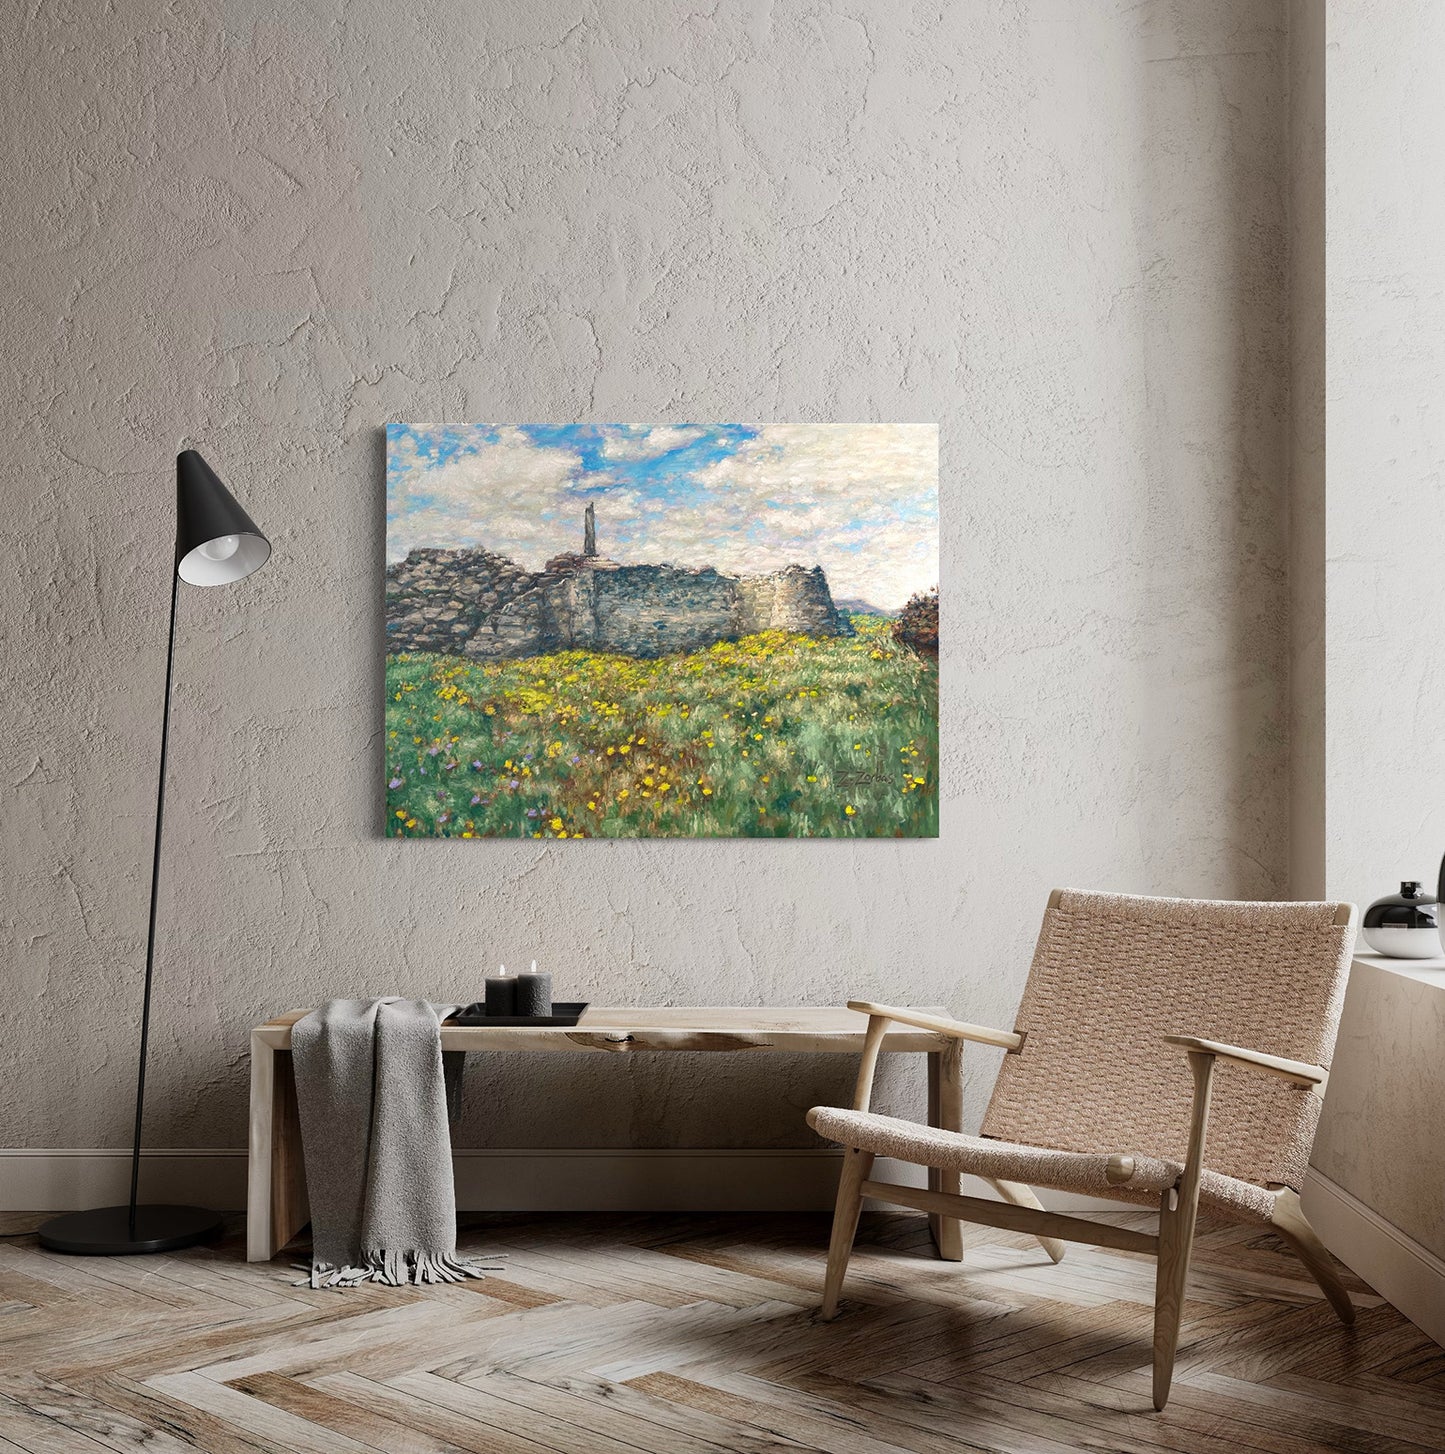 Original Painting: Temple of Apollo in the Spring